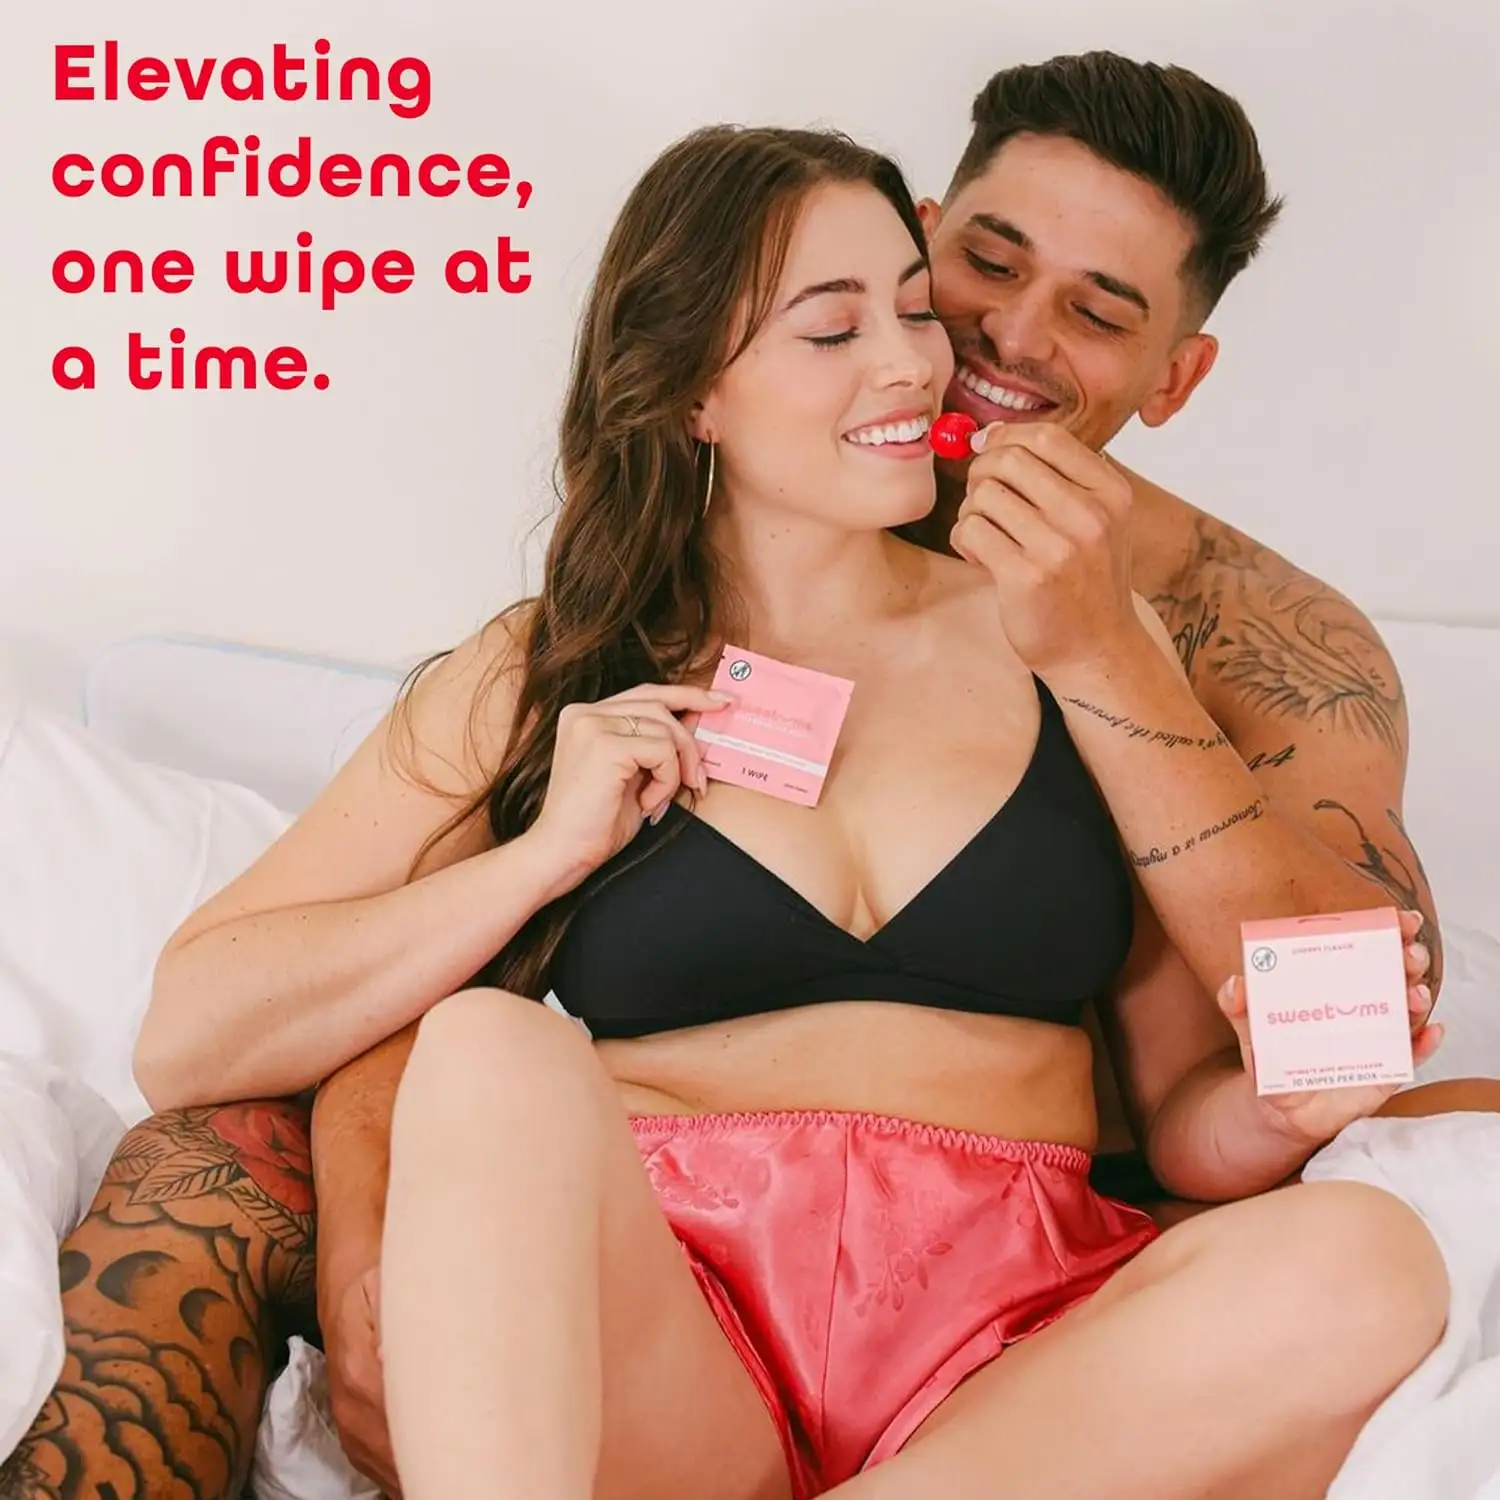 Single Pack Body Feminine Wipes Intimate Wipes for Women Vaginal Cleaning Disposable Wet Tissue